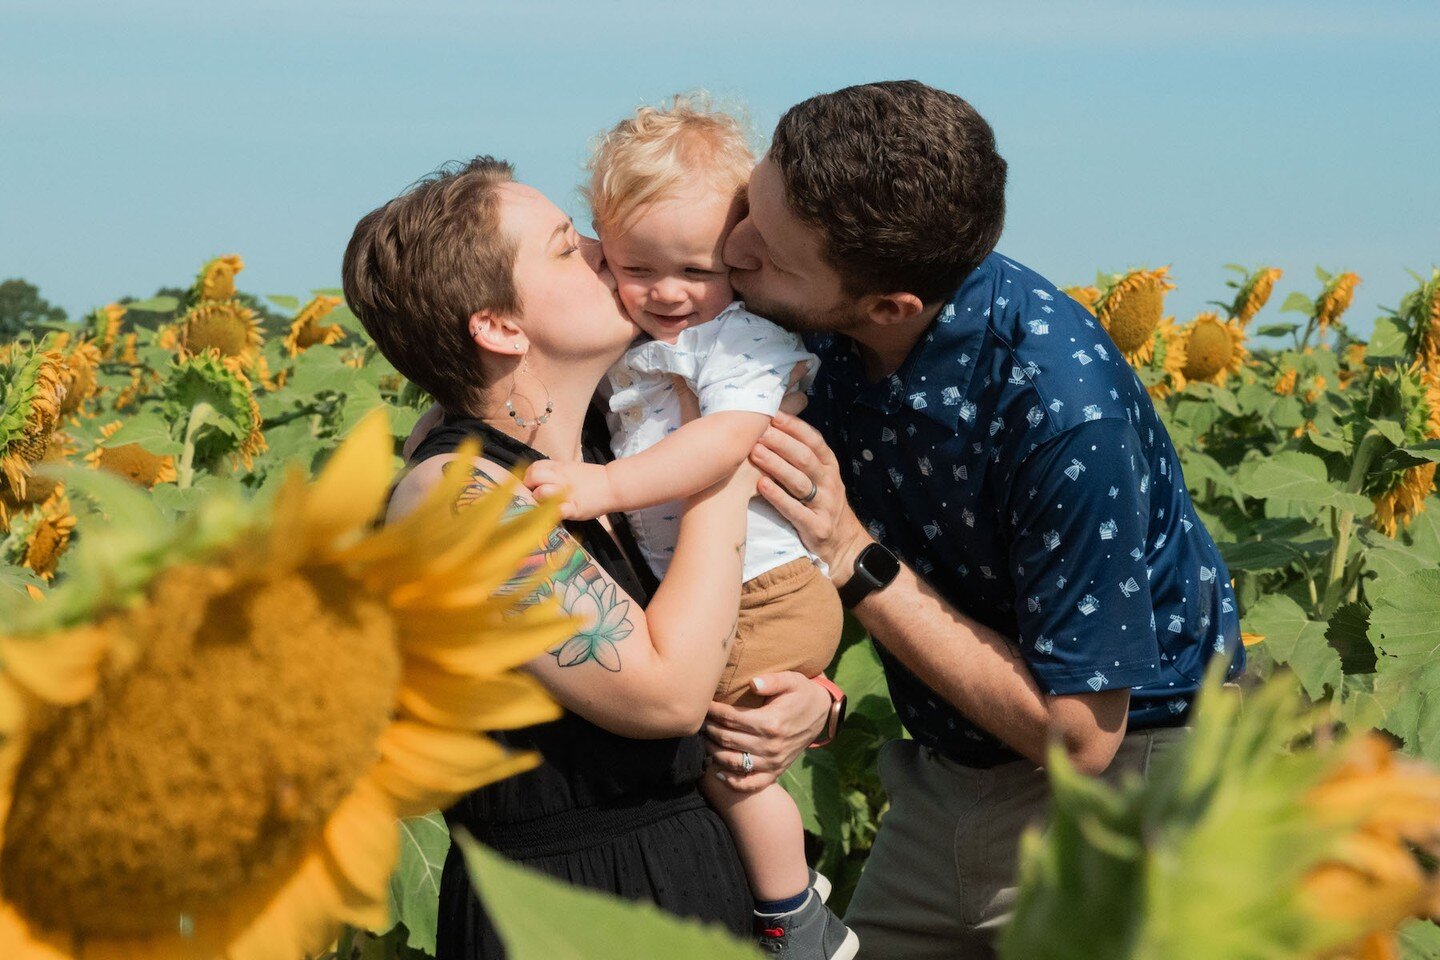 It's almost holiday card season! But here's some sweet sunflower family photo memories. 🌻

Book a photo session at https://www.kaylajanellecook.com/fandbphotog 📸
.
Alt Text:
Image 1: Emily and David kiss their son, Dean, on the cheek in one of Grin